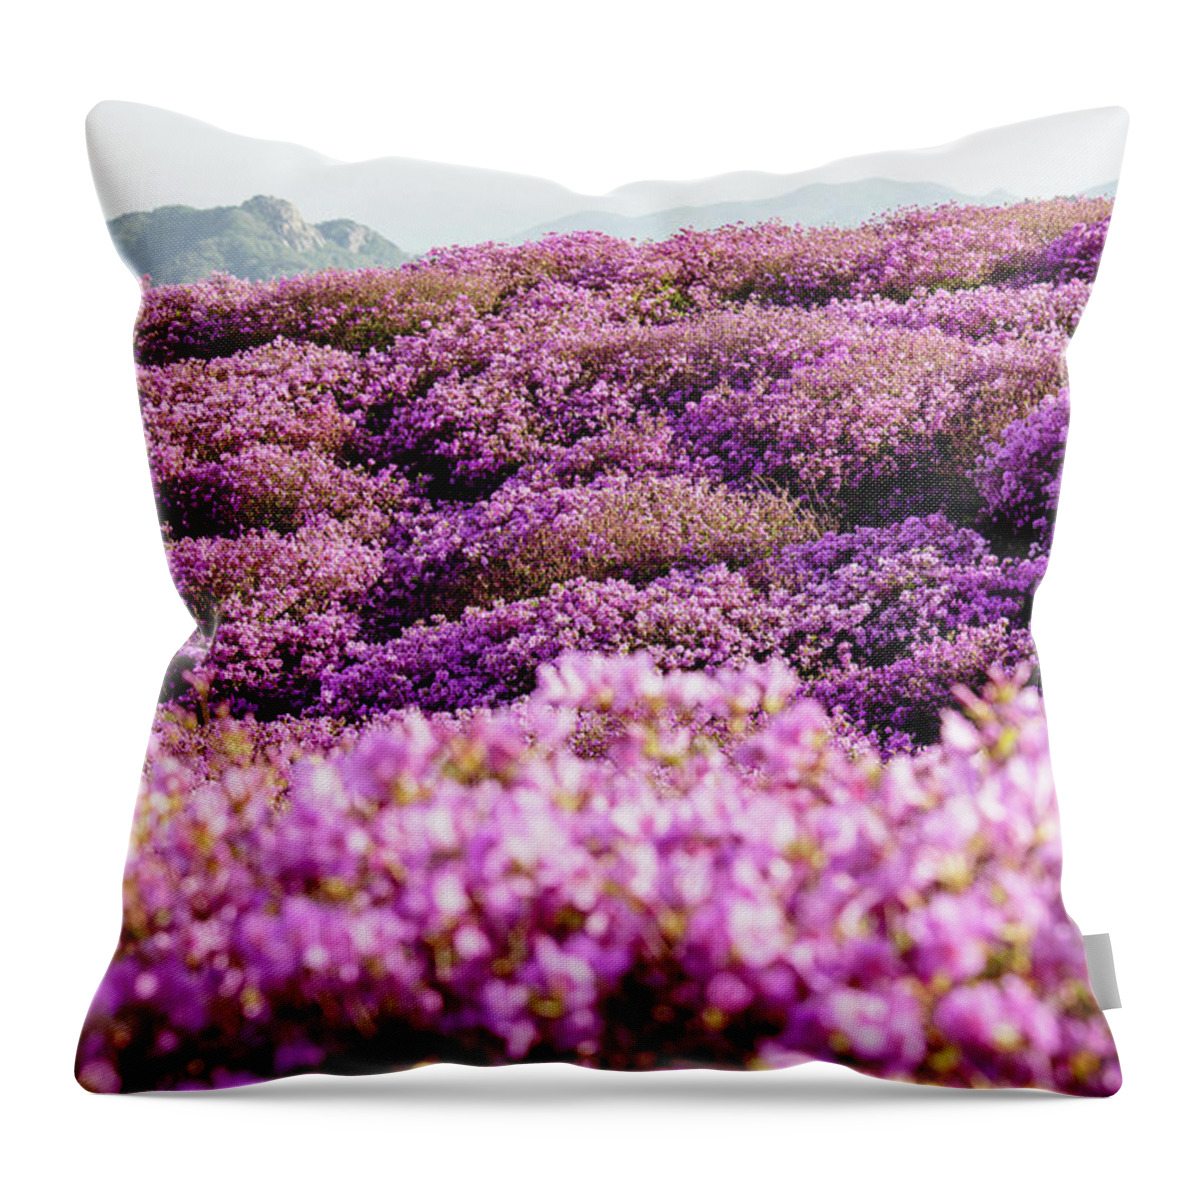 Purple Throw Pillow featuring the photograph Spring Flowers At The Hwangmaesan by Insung Jeon